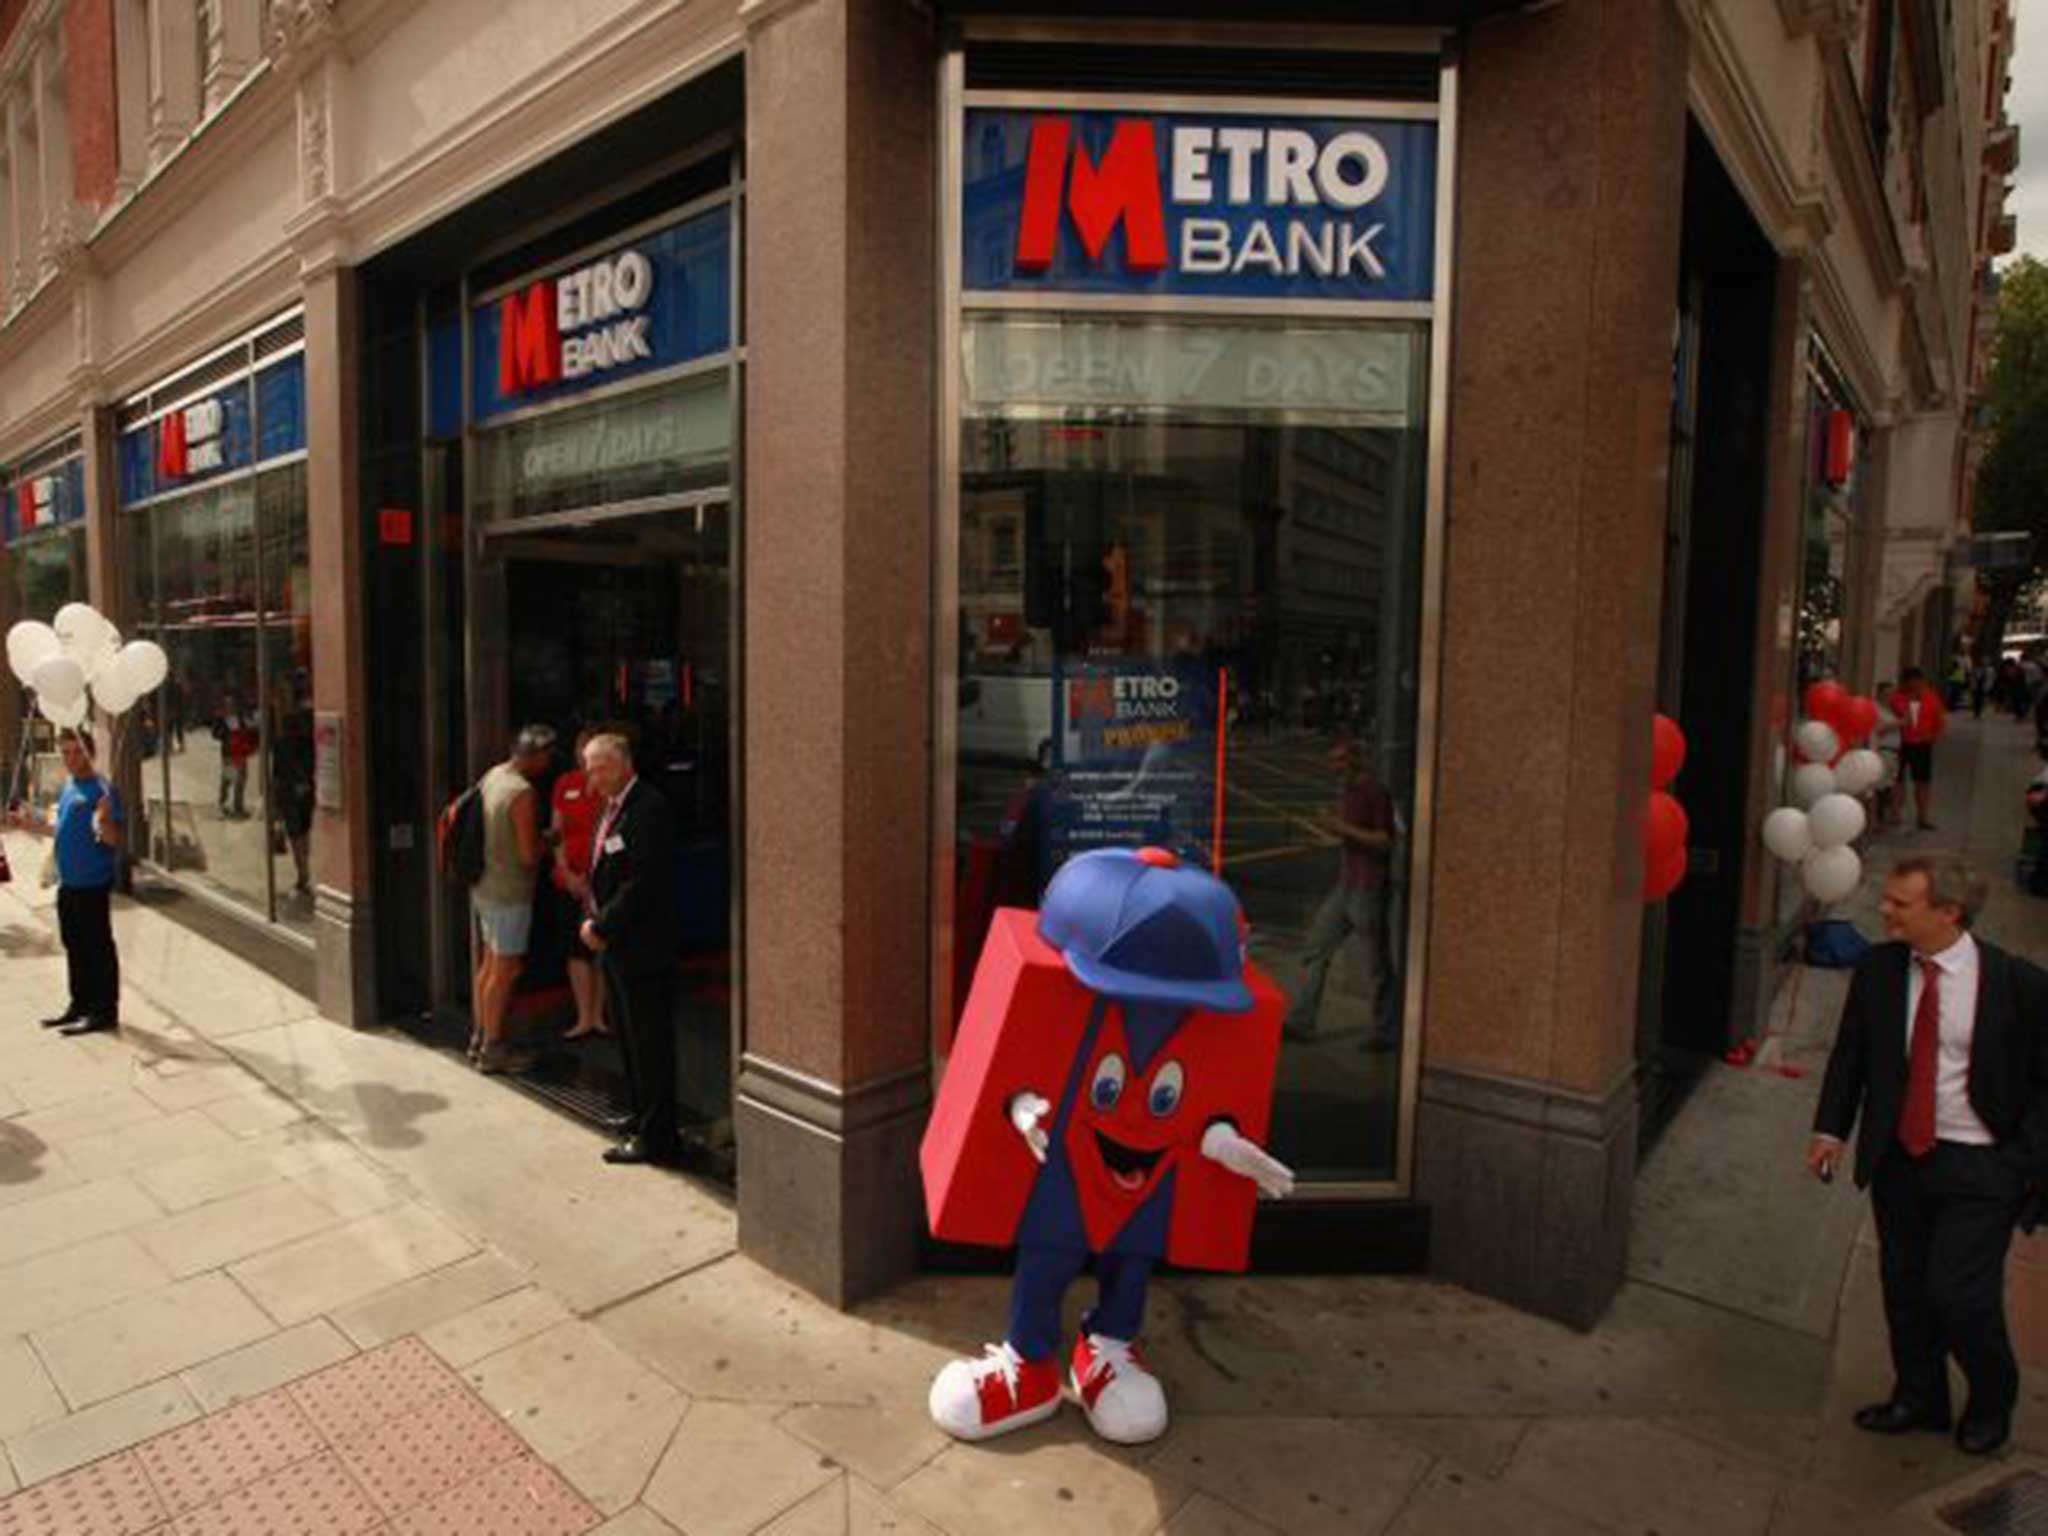 Metro Bank is known for its quirky culture